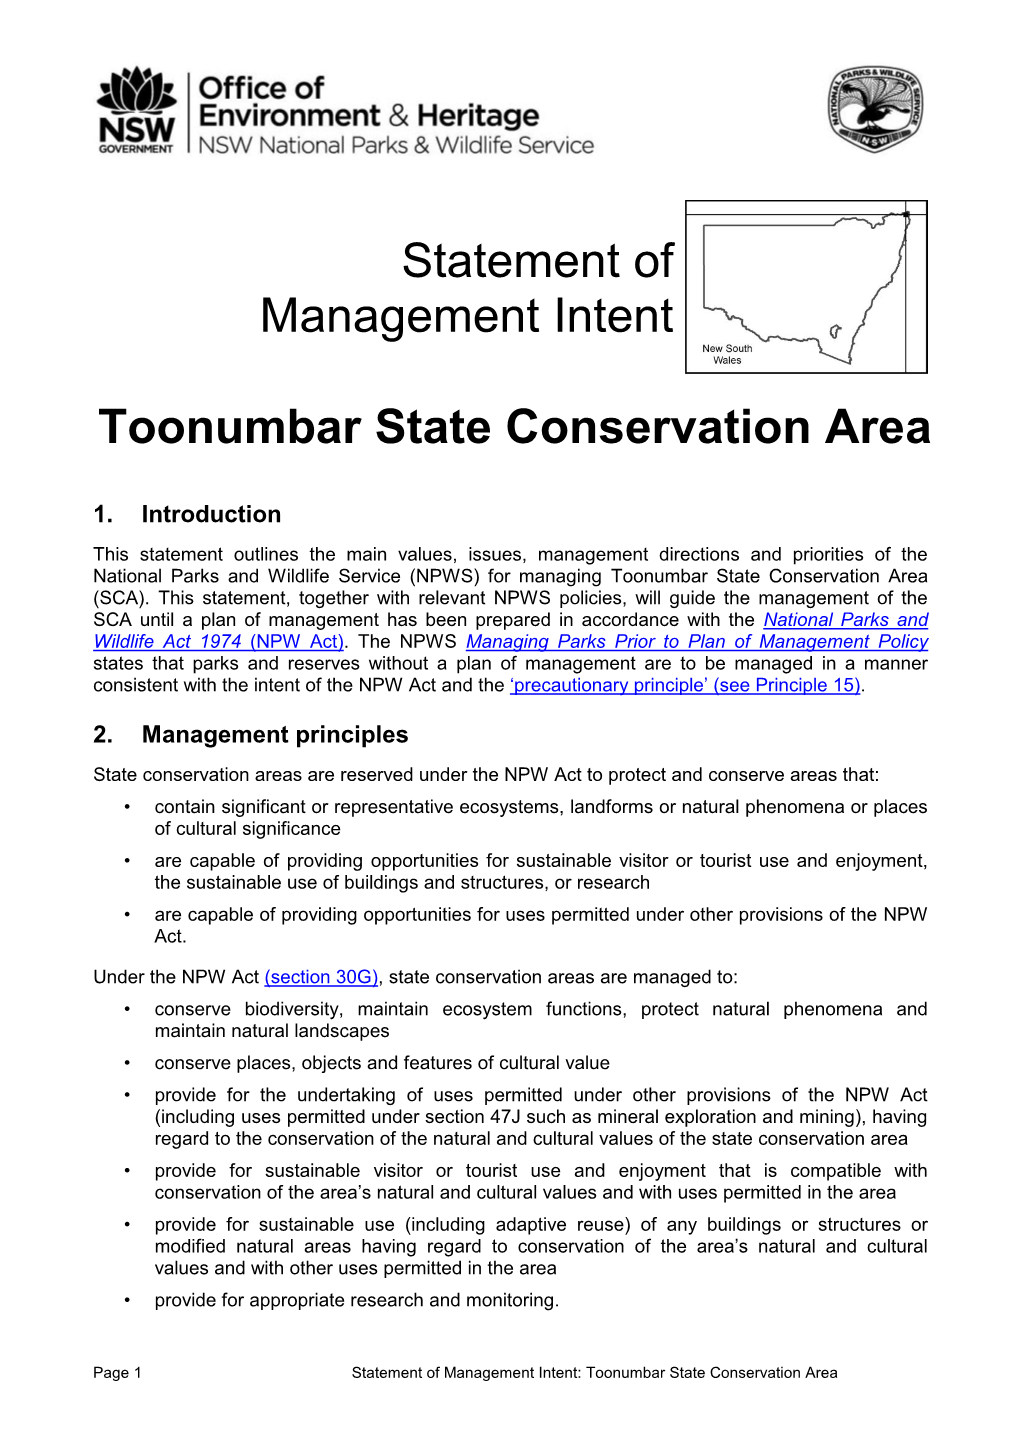 Toonumbar State Conservation Area